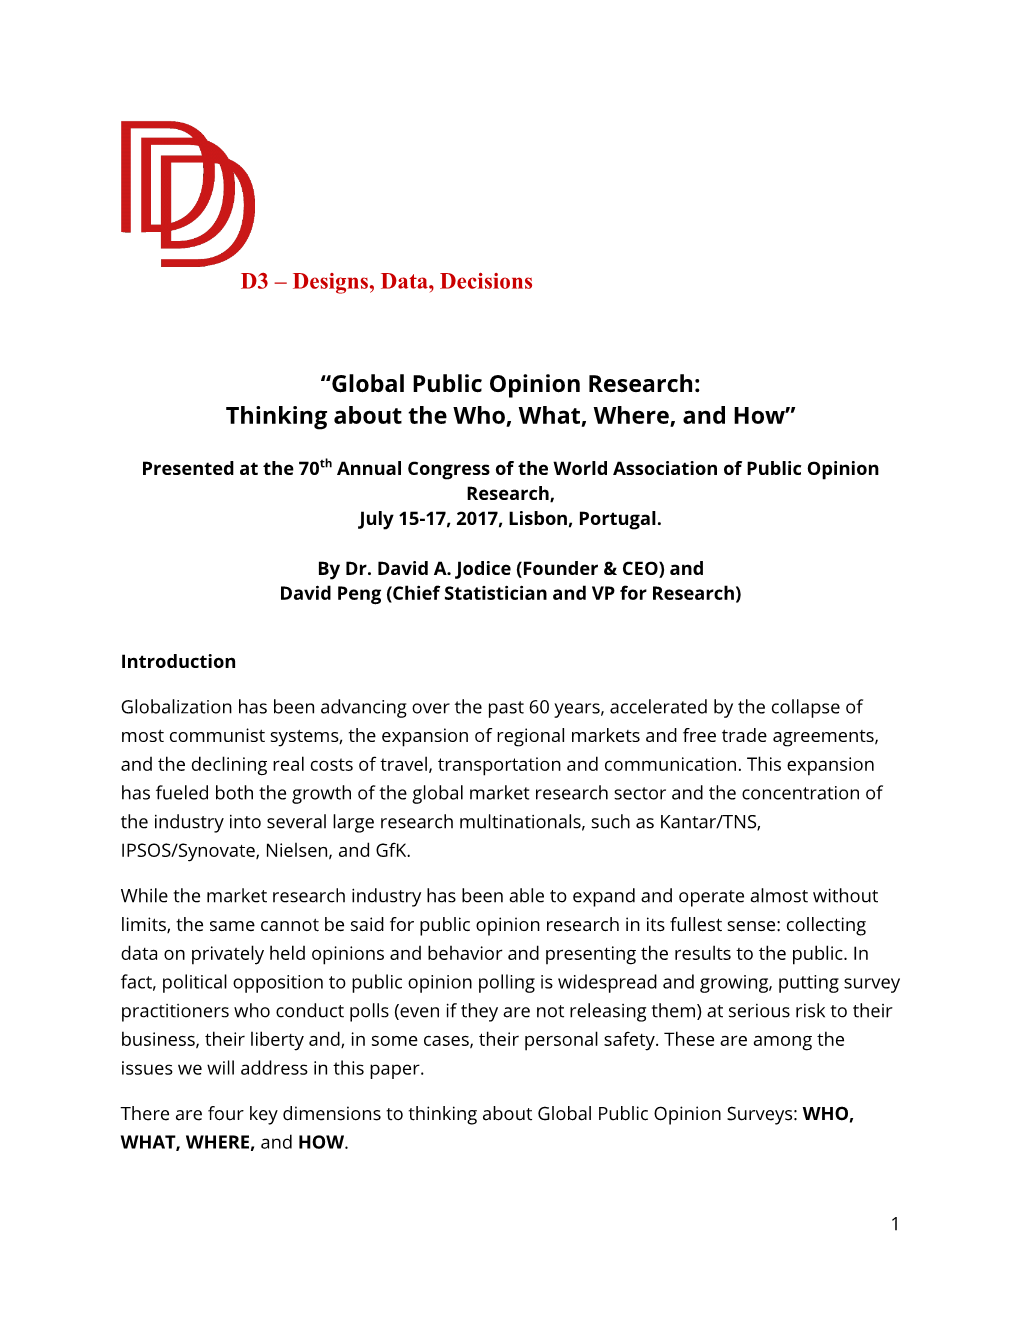 Global Public Opinion Research: Thinking About the Who, What, Where, and How”